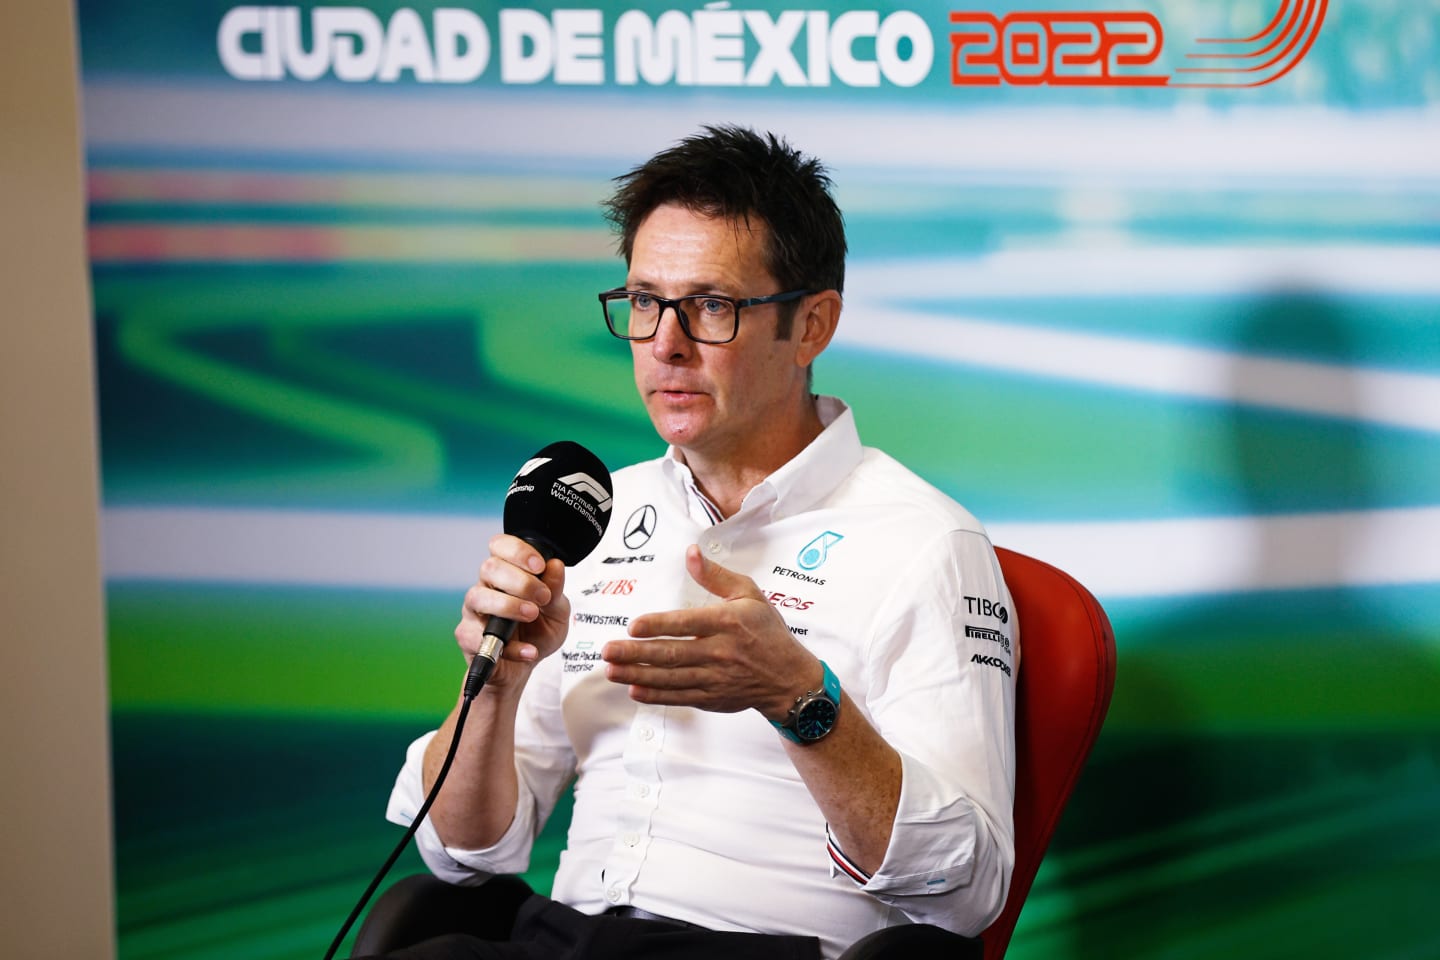 MEXICO CITY, MEXICO - OCTOBER 29: Andrew Shovlin, Trackside Engineering Director of Mercedes GP attends the Team Principals Press Conference prior to final practice ahead of the F1 Grand Prix of Mexico at Autodromo Hermanos Rodriguez on October 29, 2022 in Mexico City, Mexico. (Photo by Chris Graythen/Getty Images)